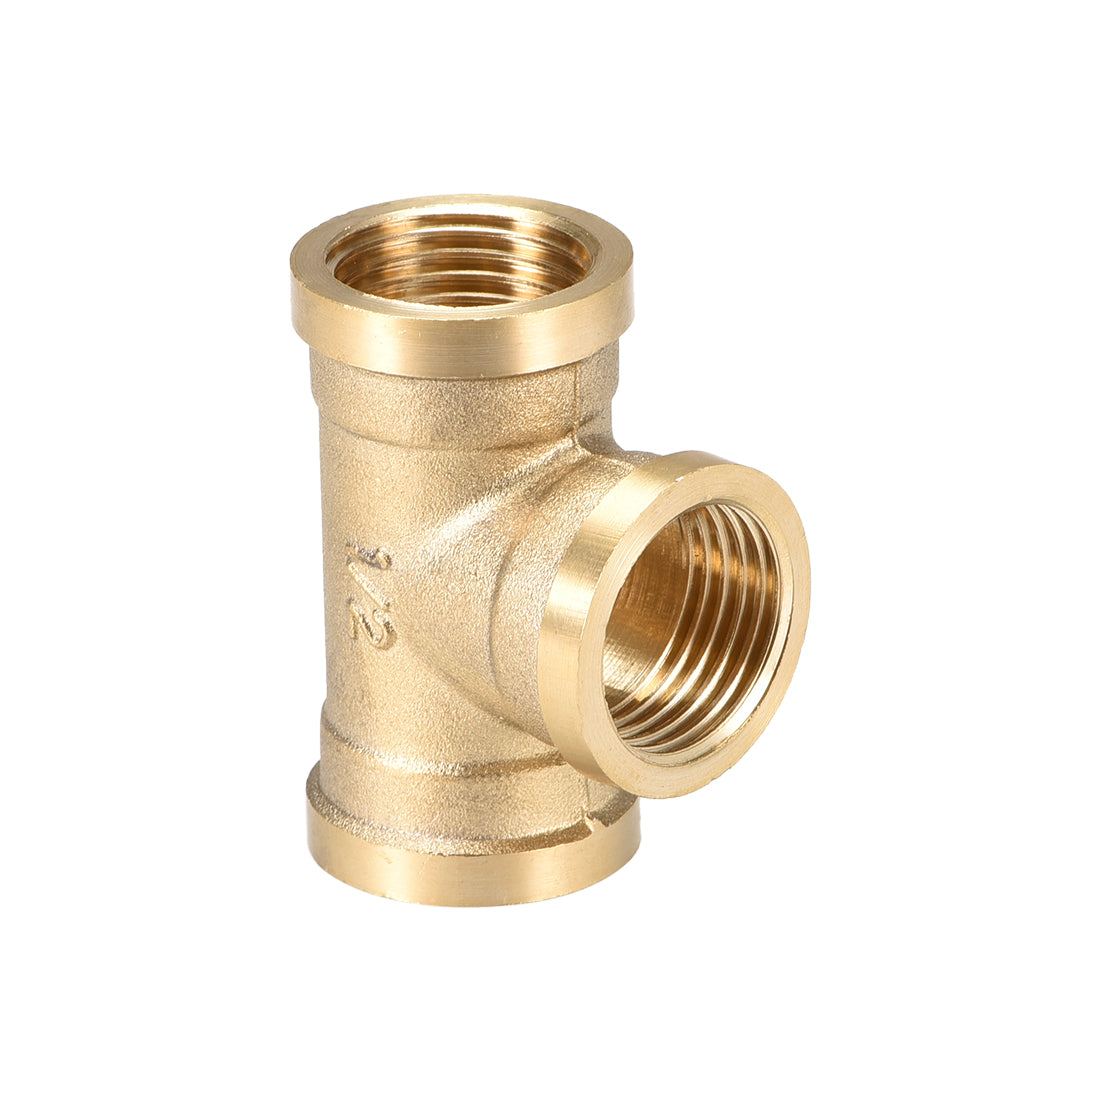 uxcell Uxcell Brass Tee Pipe Fitting G1/2  Female Thread T Shaped Connector Coupler